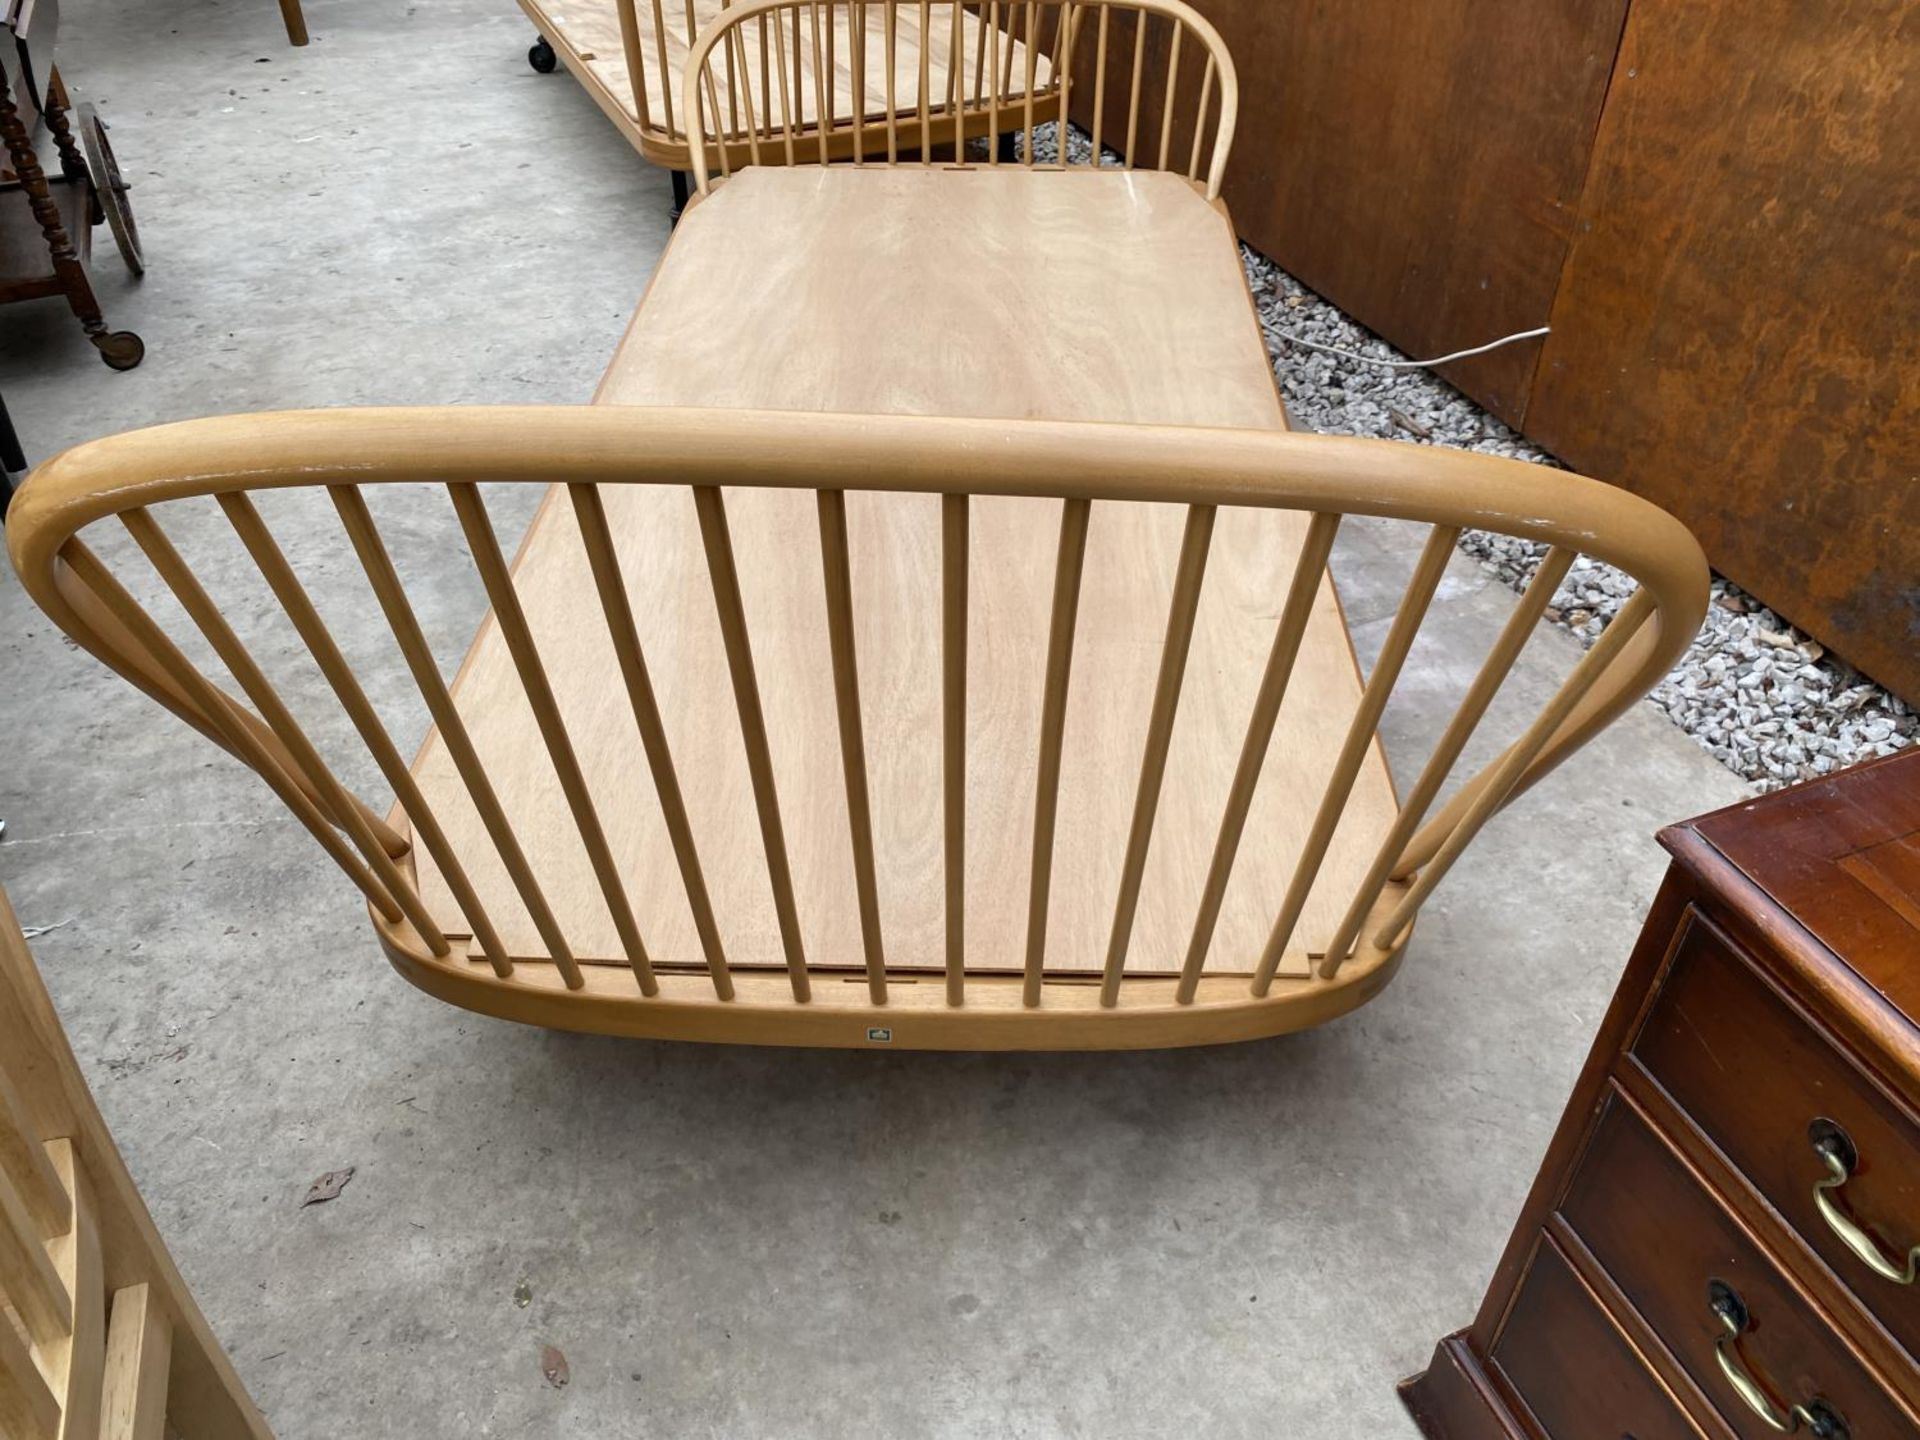 AN ERCOL BLUE LABEL BLONDE 3'6" WINDSOR STYLE BED - Image 6 of 6